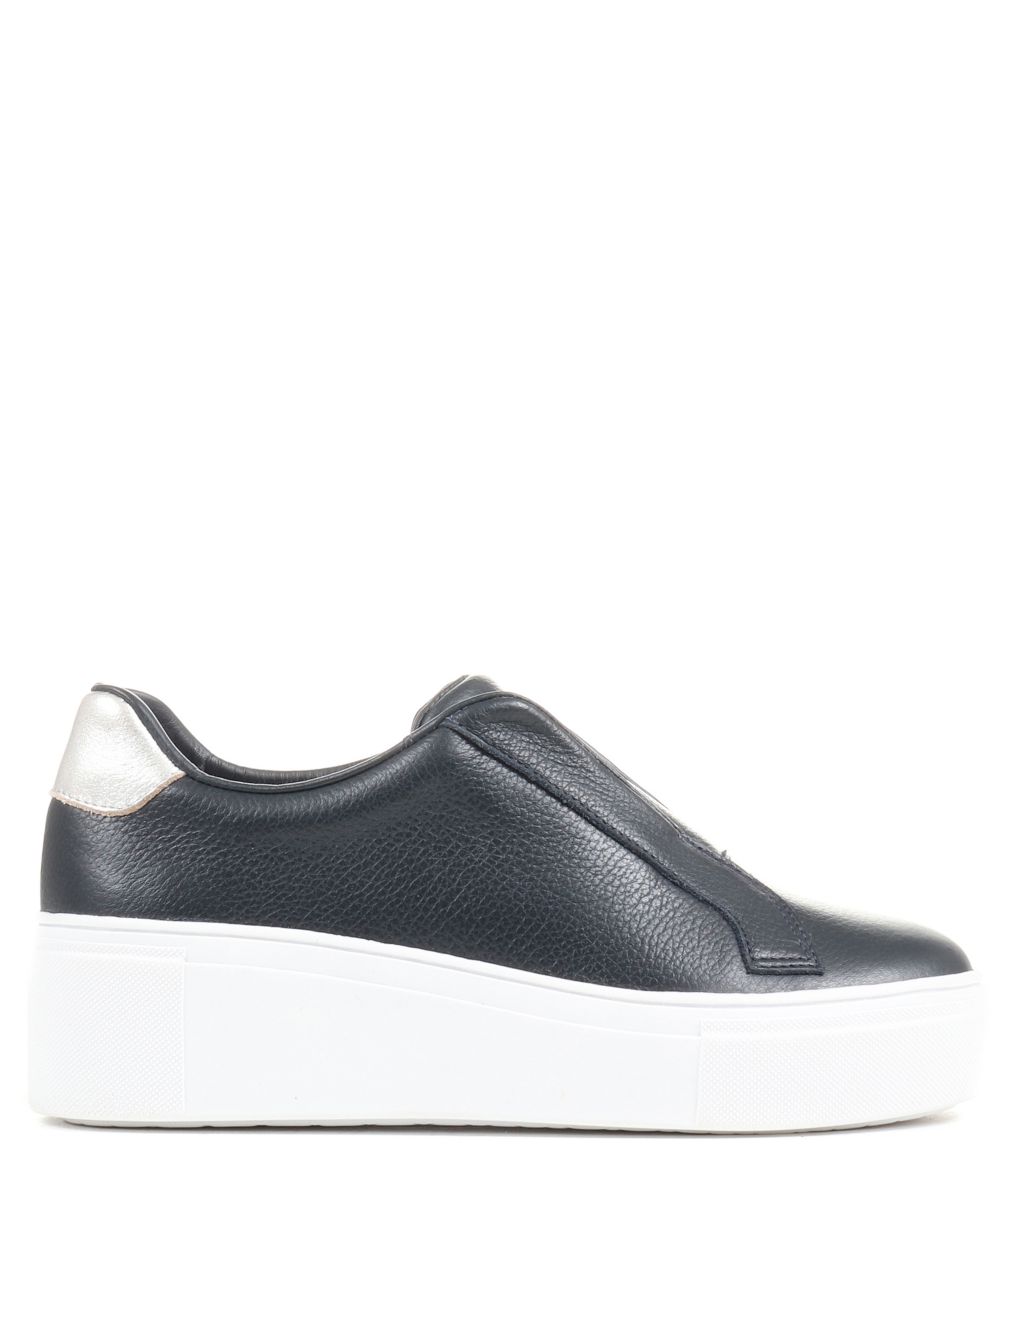 Leather Slip On Trainers image 5